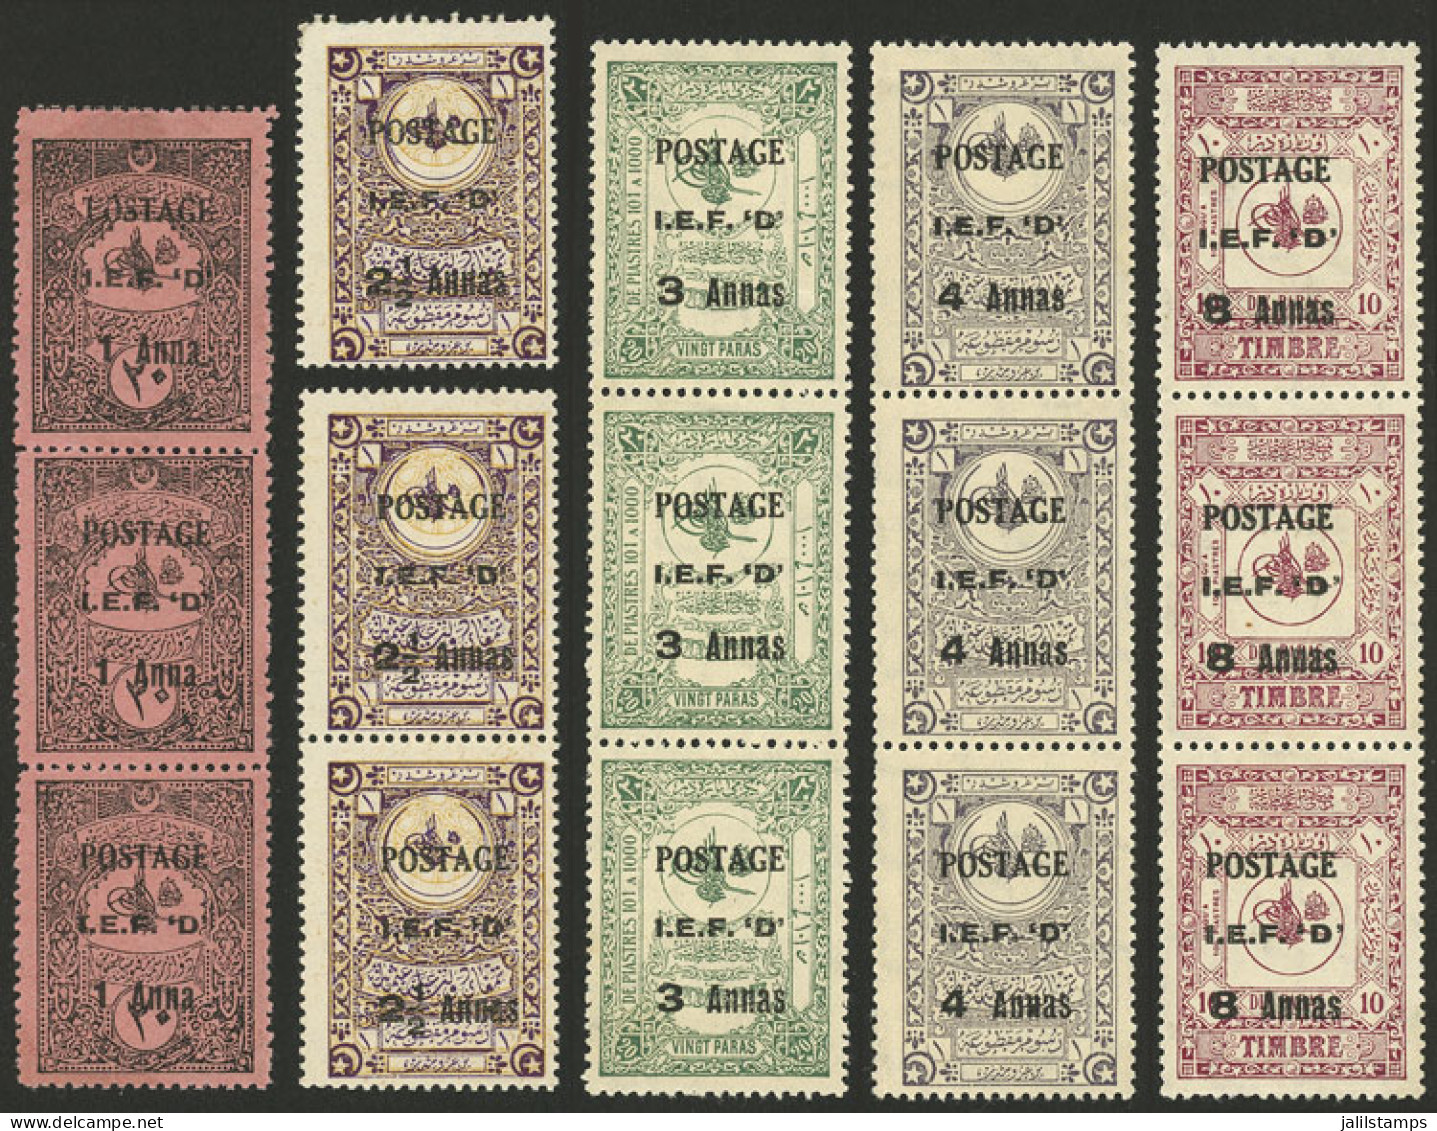 IRAQ: Sc.N43 + Other Values, 1919 5 Overprinted Values Of Turkey, Strips Of 3 (the 2½ Value In Pair + Single), MNH, Supe - Iraq